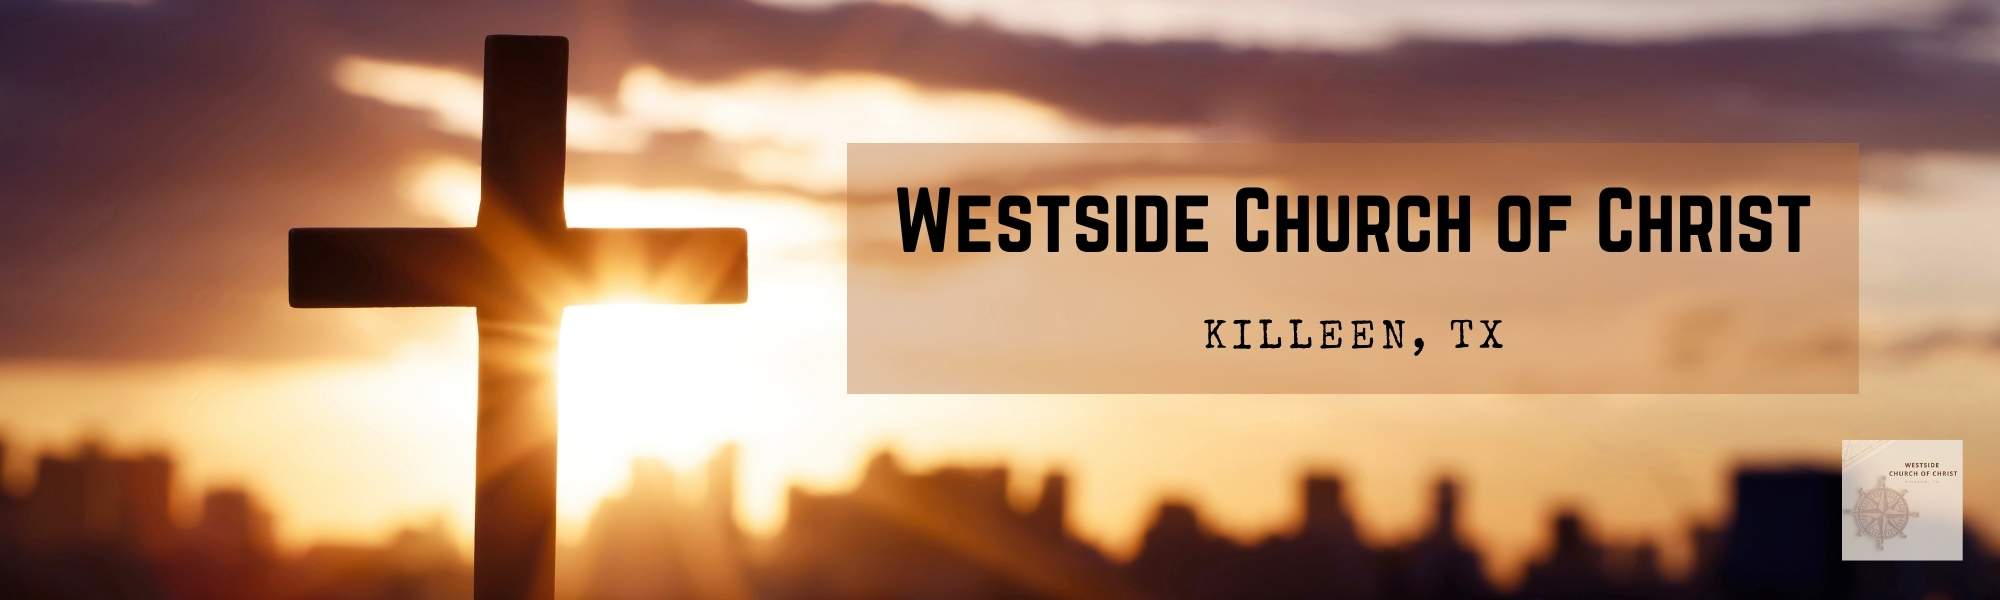 Banner with Westside Church of Christ, Killeen, Tx